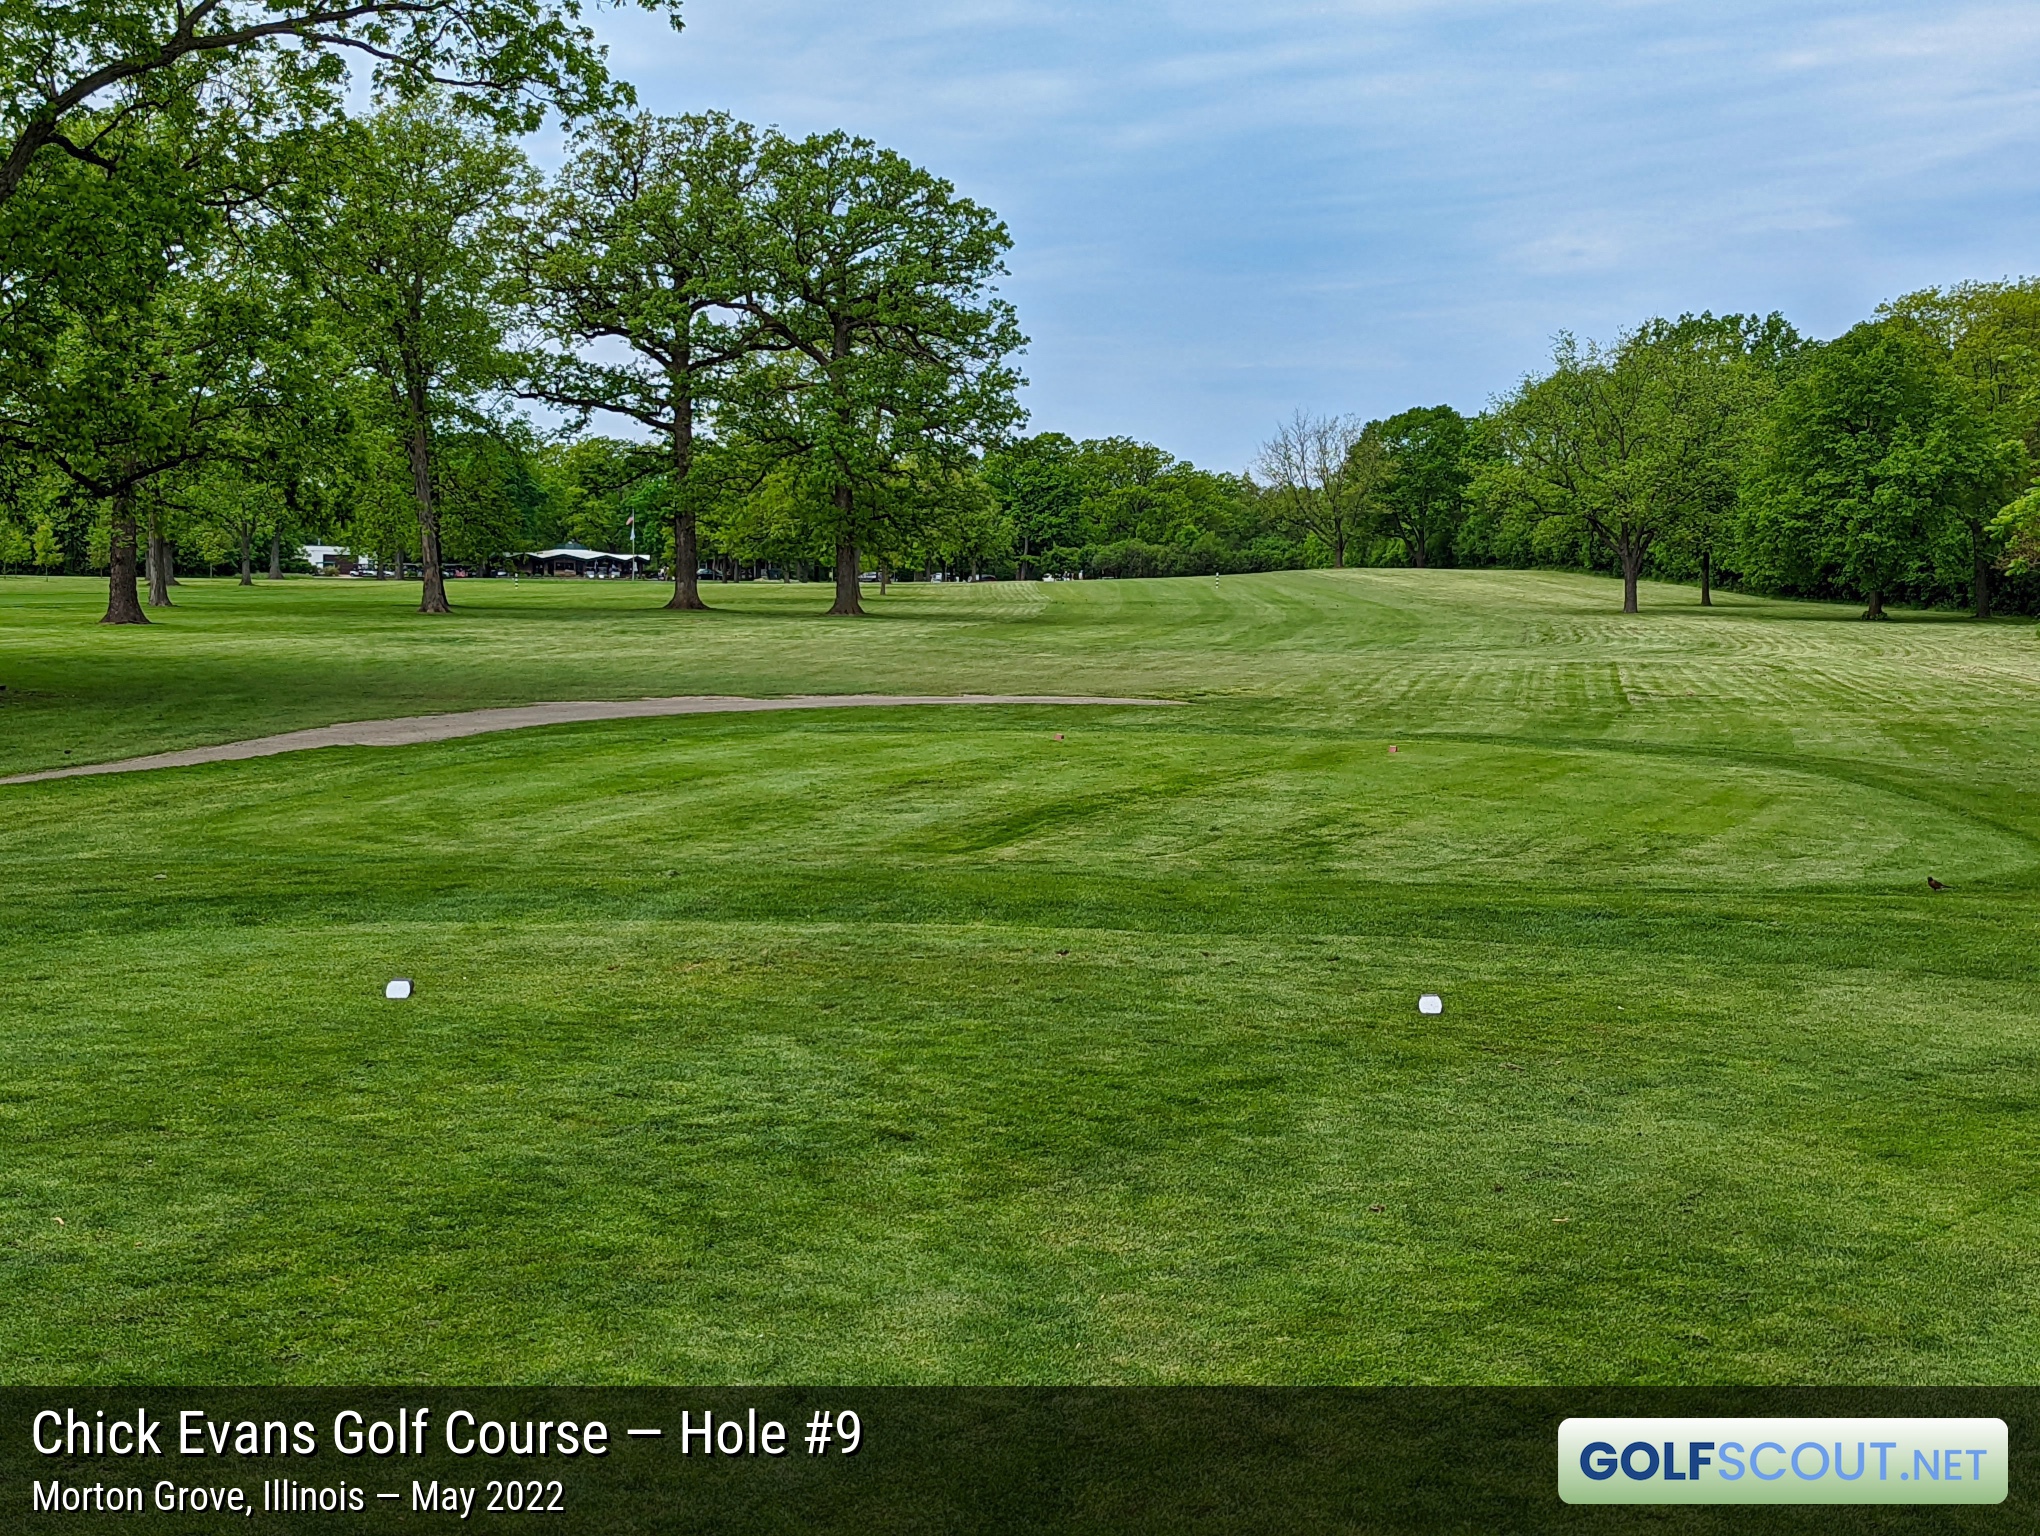 Photo of hole #9 at Chick Evans Golf Course in Morton Grove, Illinois. 